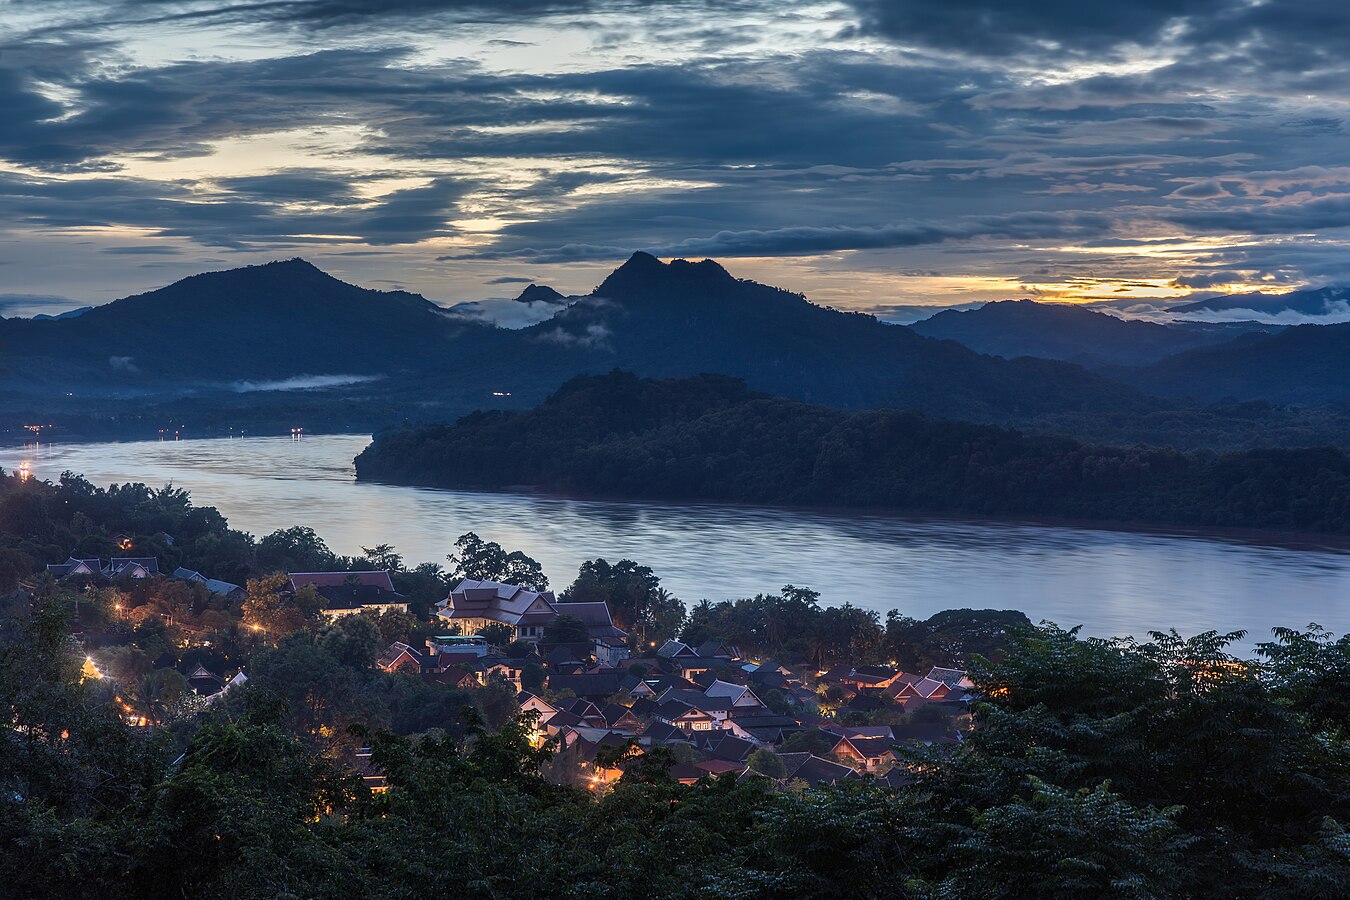 Mountains Mekong river and dwellings seen from Mount Phou Si at dusk in Luang Prabang Laos